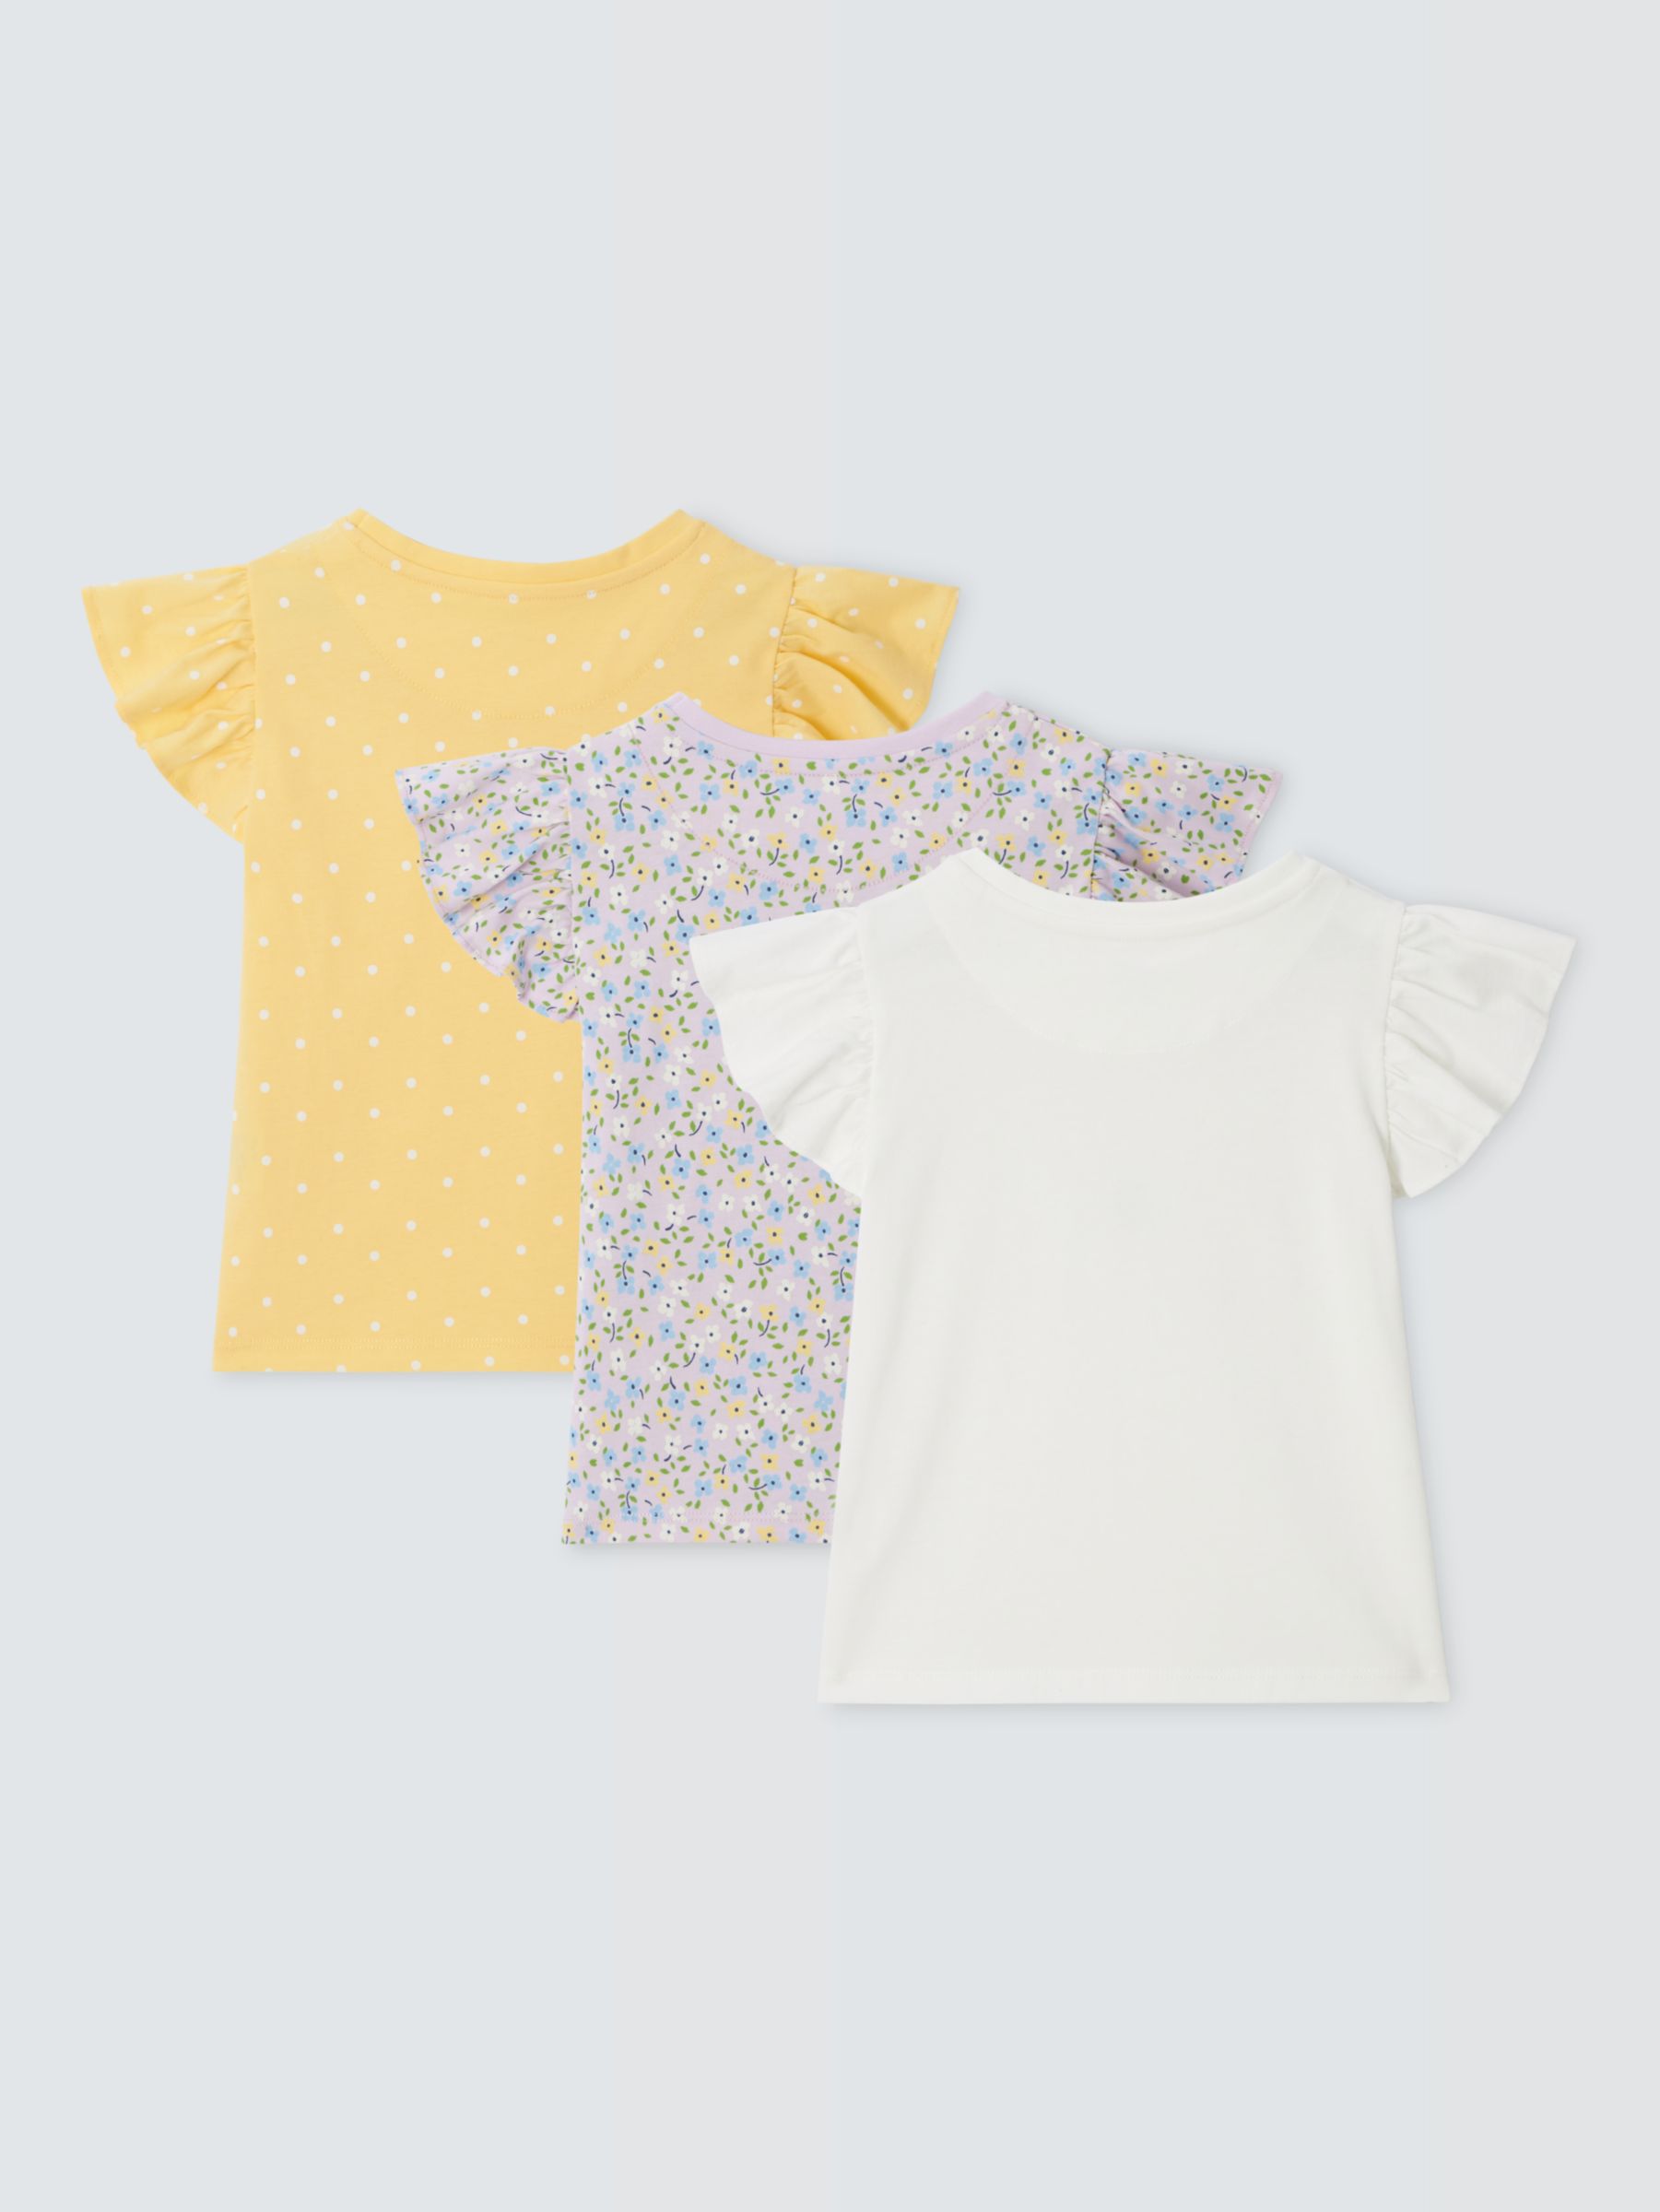 John Lewis Kids' Spot/Floral/Flower Frill Sleeve T-Shirts, Pack of 3, Multi, 7 years